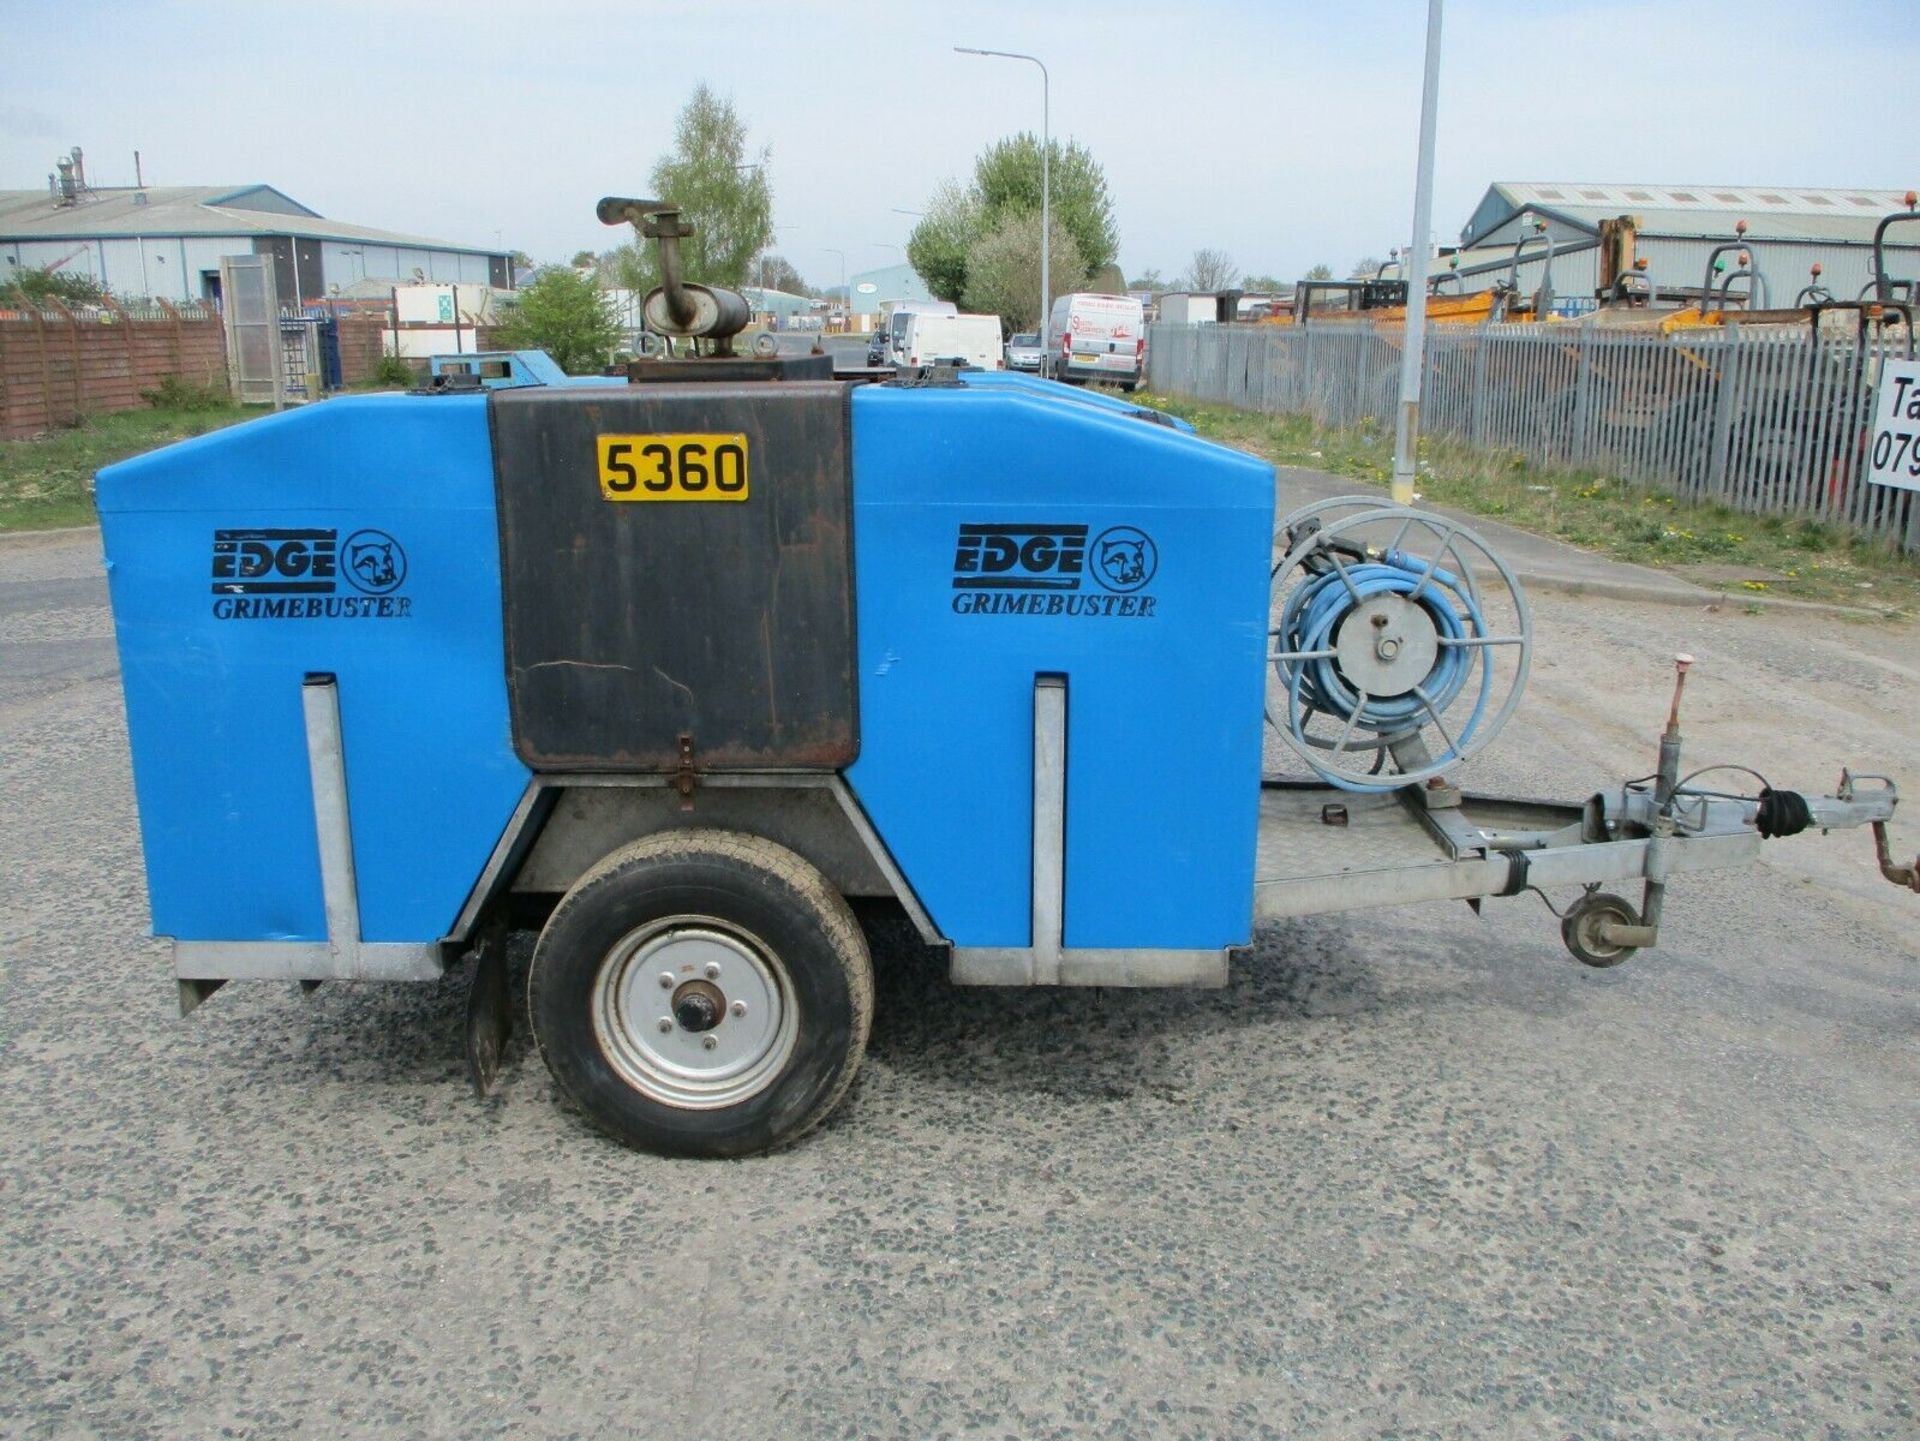 Edge Grime Buster Towable Hot and Cold Diesel Engined Pressure Washer